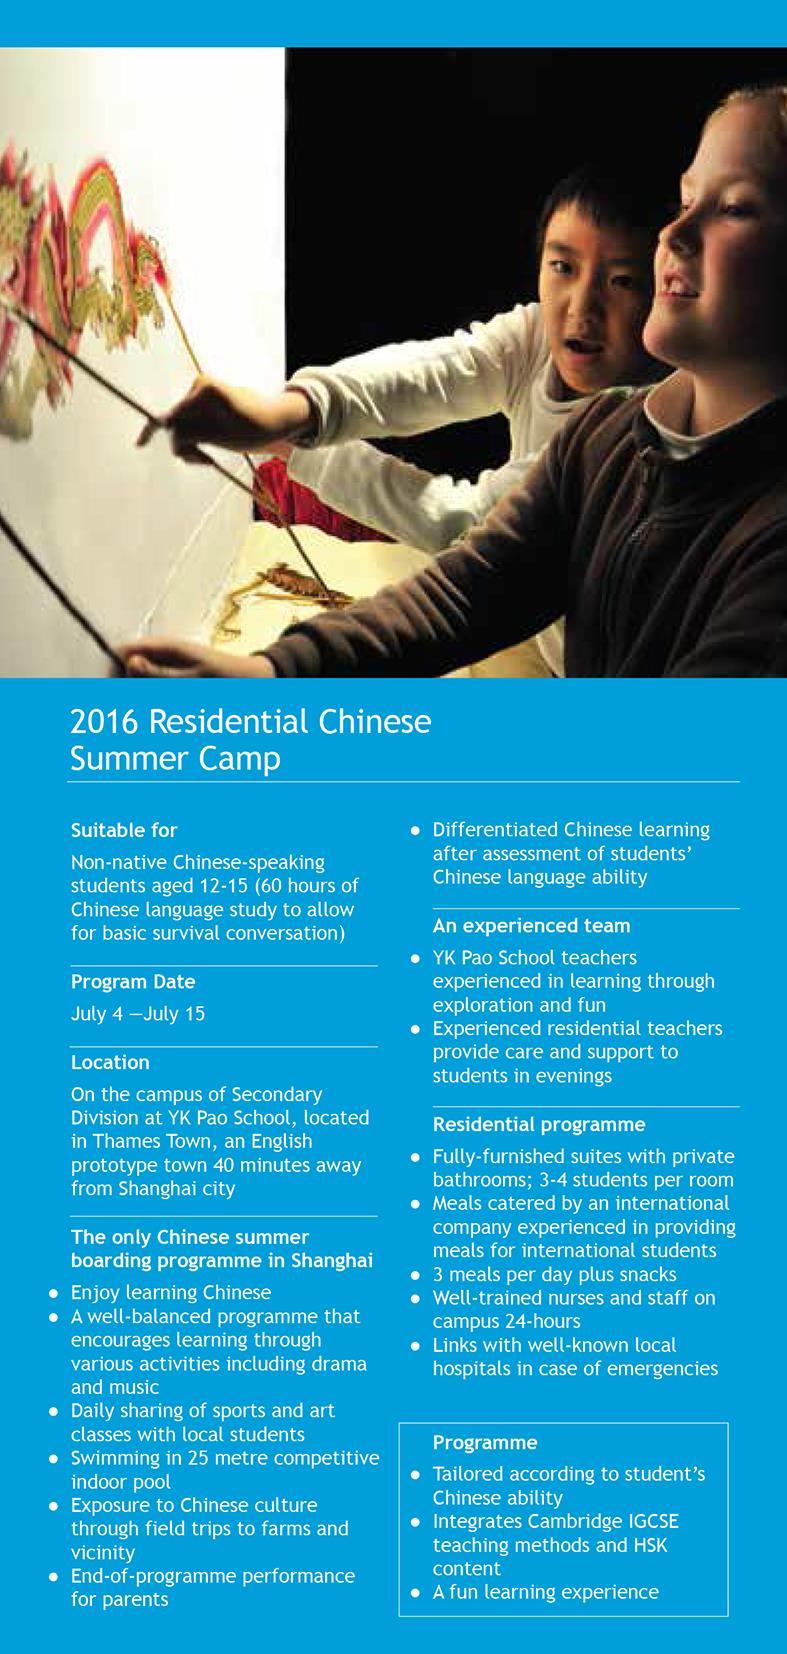 enjoyable environment and gain a taste of Chinese culture while living in Shanghai.